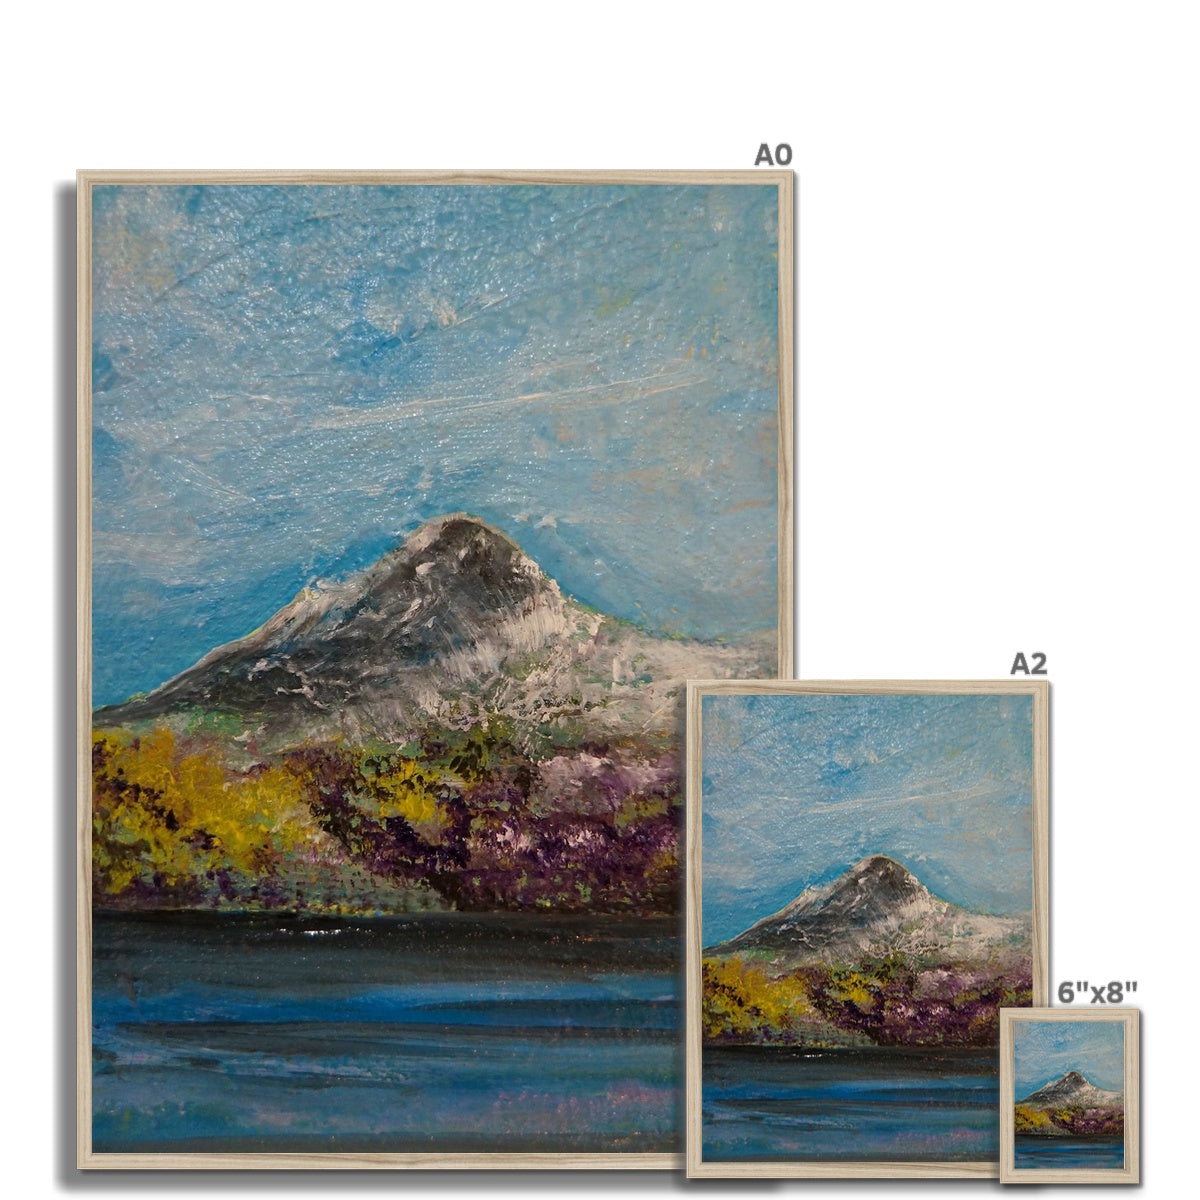 Ben Lomond ii Painting | Framed Prints From Scotland-Framed Prints-Scottish Lochs & Mountains Art Gallery-Paintings, Prints, Homeware, Art Gifts From Scotland By Scottish Artist Kevin Hunter